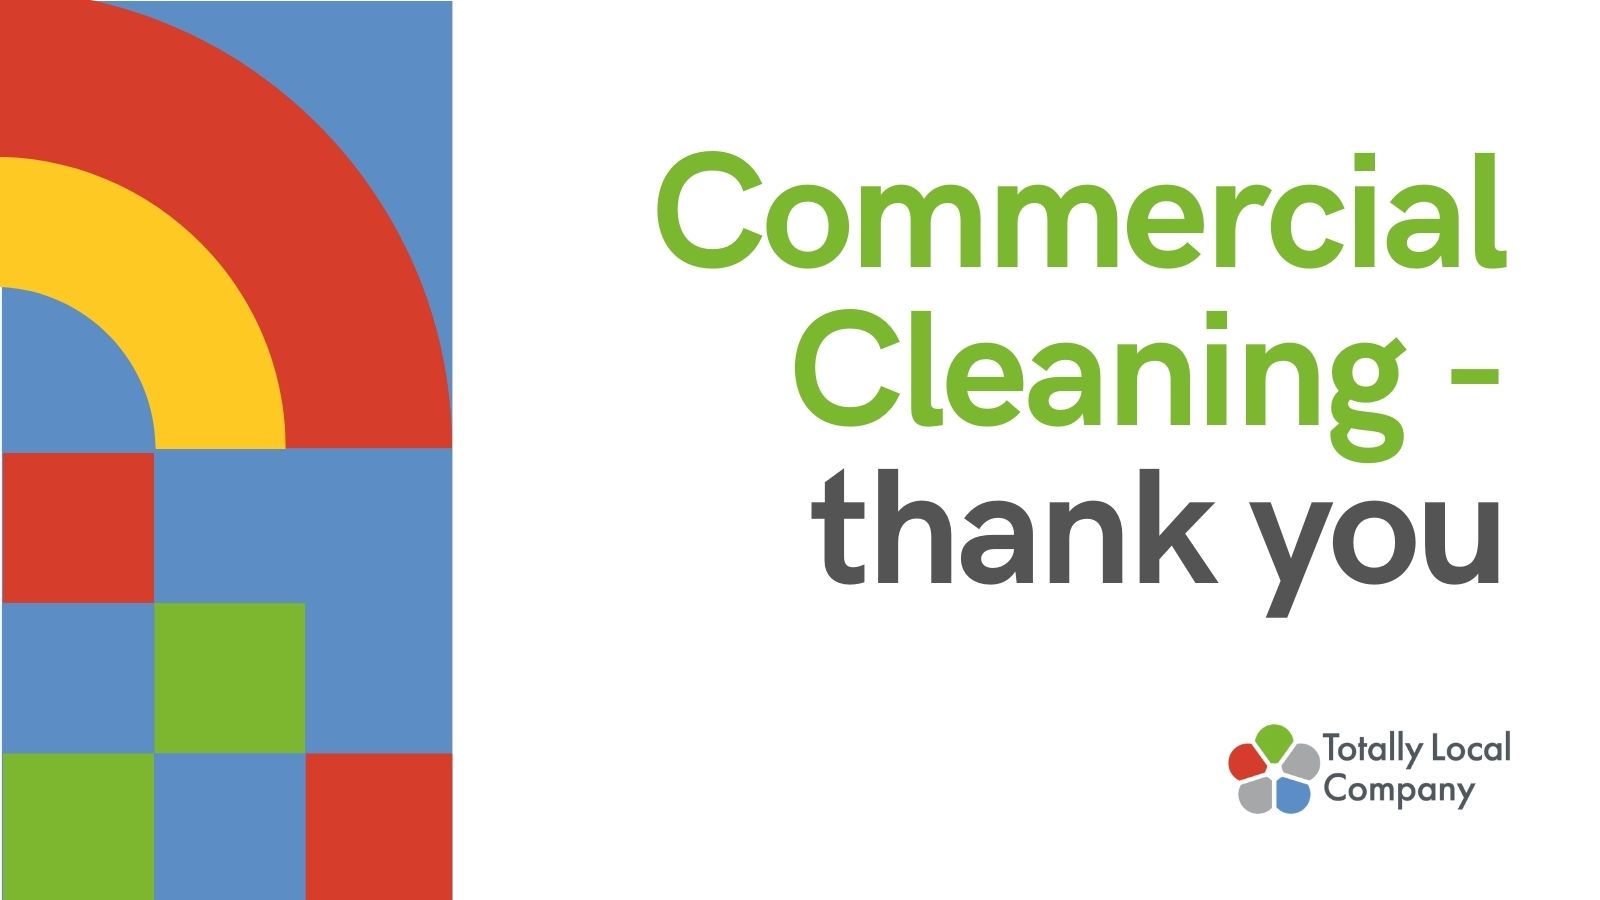 wording - commercial cleaning thank you, with brightly coloured image in the background